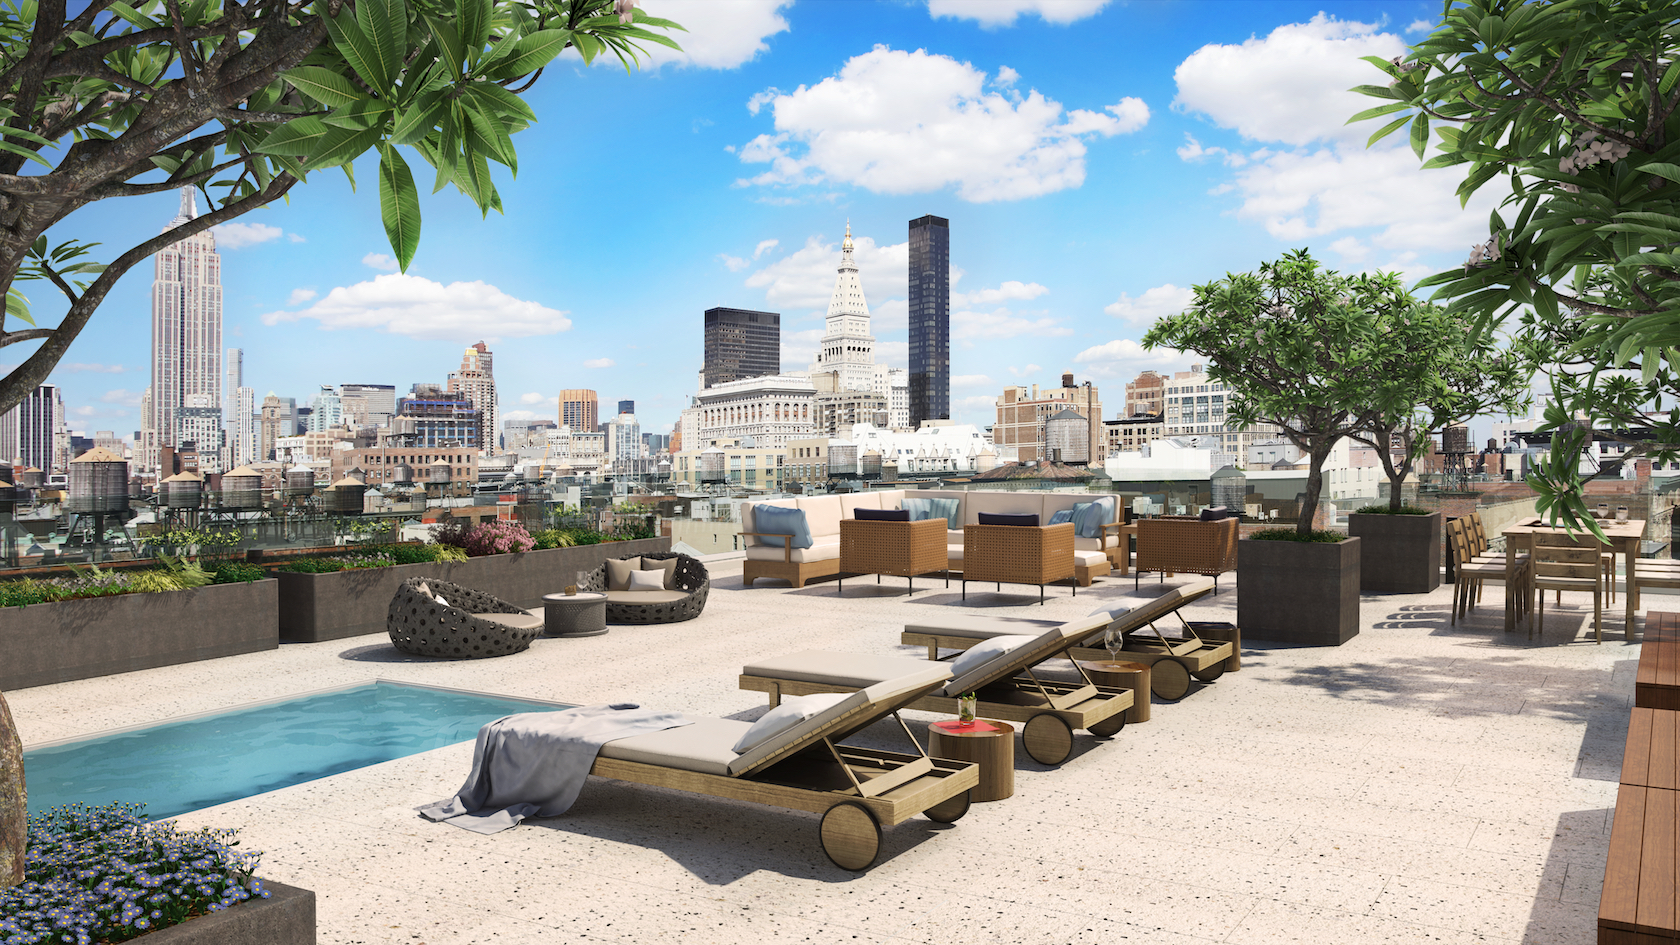 rooftop terrace with a pool in new york city.